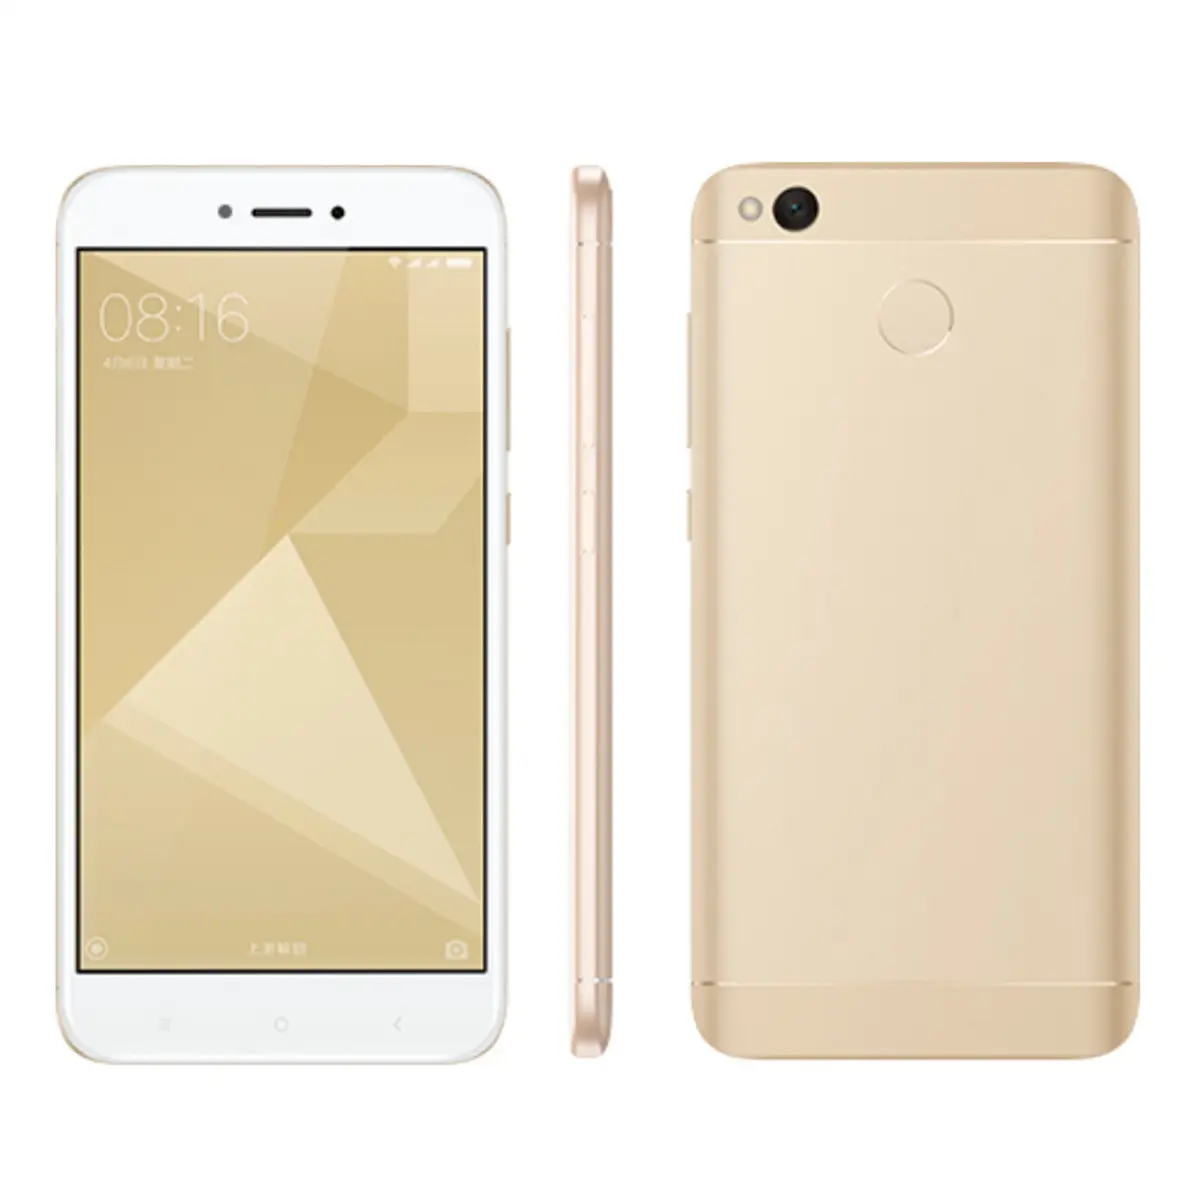 Original Android Smartphone Used for Xiaomi Redmi Note4 4A 4X Mobile Phone